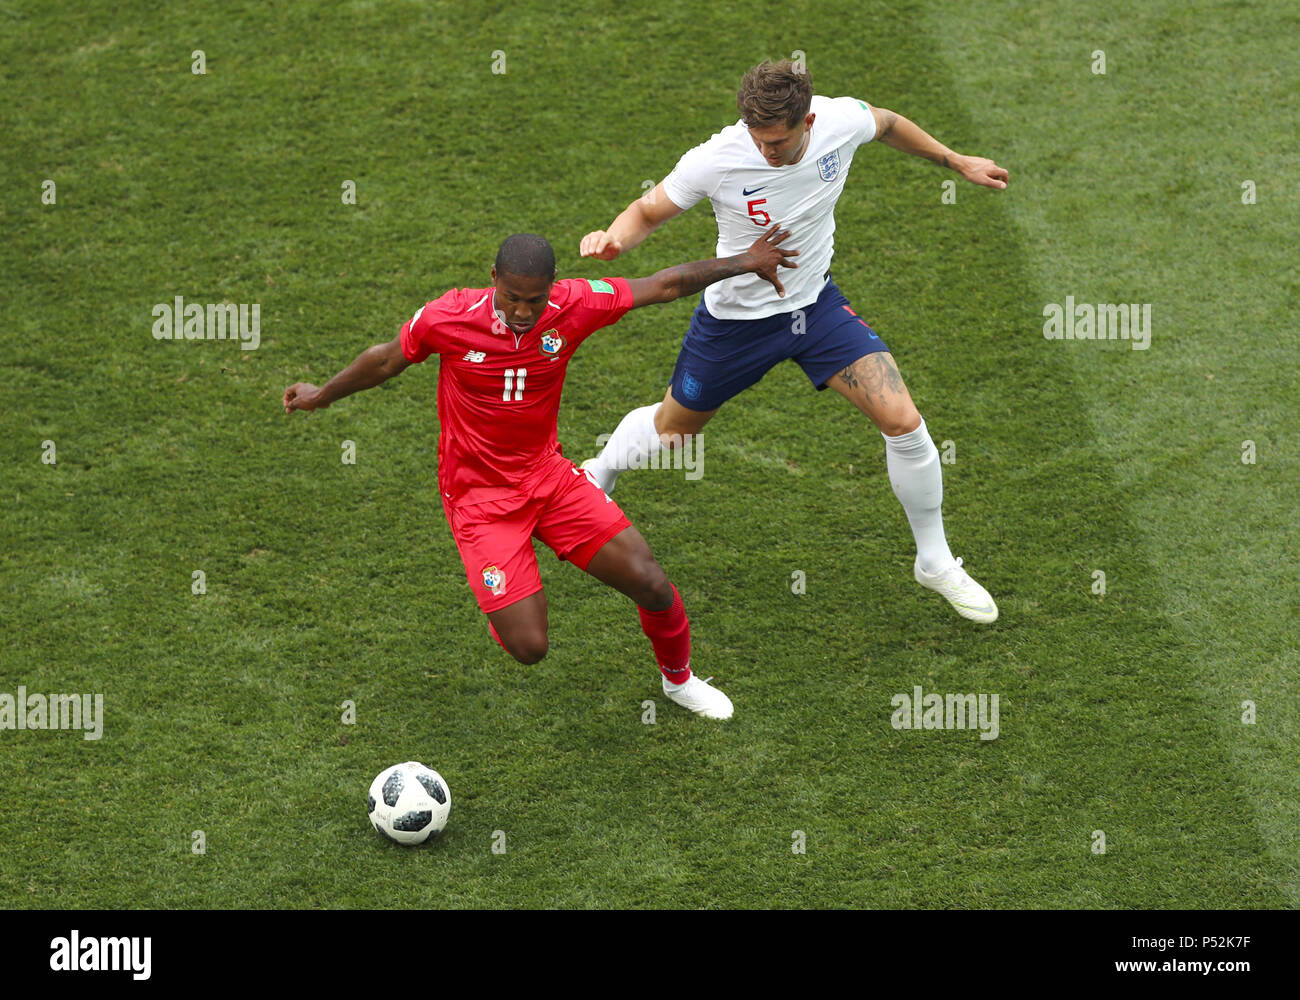 Panama's Armando Cooper and England's John Stones battle for the ballbattle for the ball during the FIFA World Cup Group G match at the Nizhny Novgorod Stadium. Stock Photo